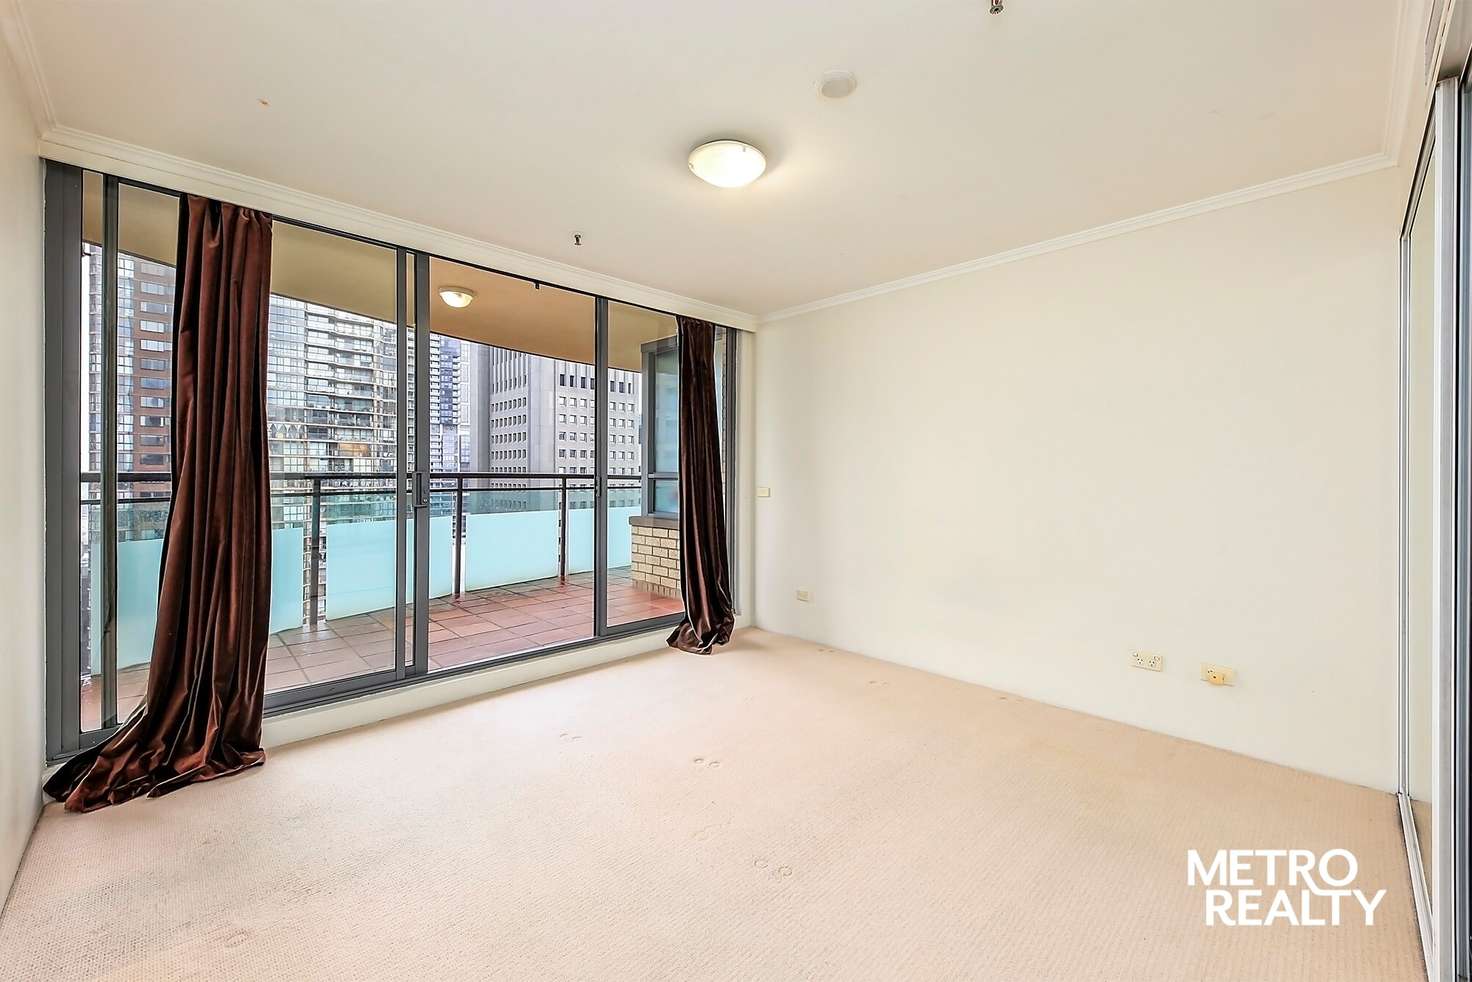 Main view of Homely apartment listing, 148 Elizabeth St, Sydney NSW 2000